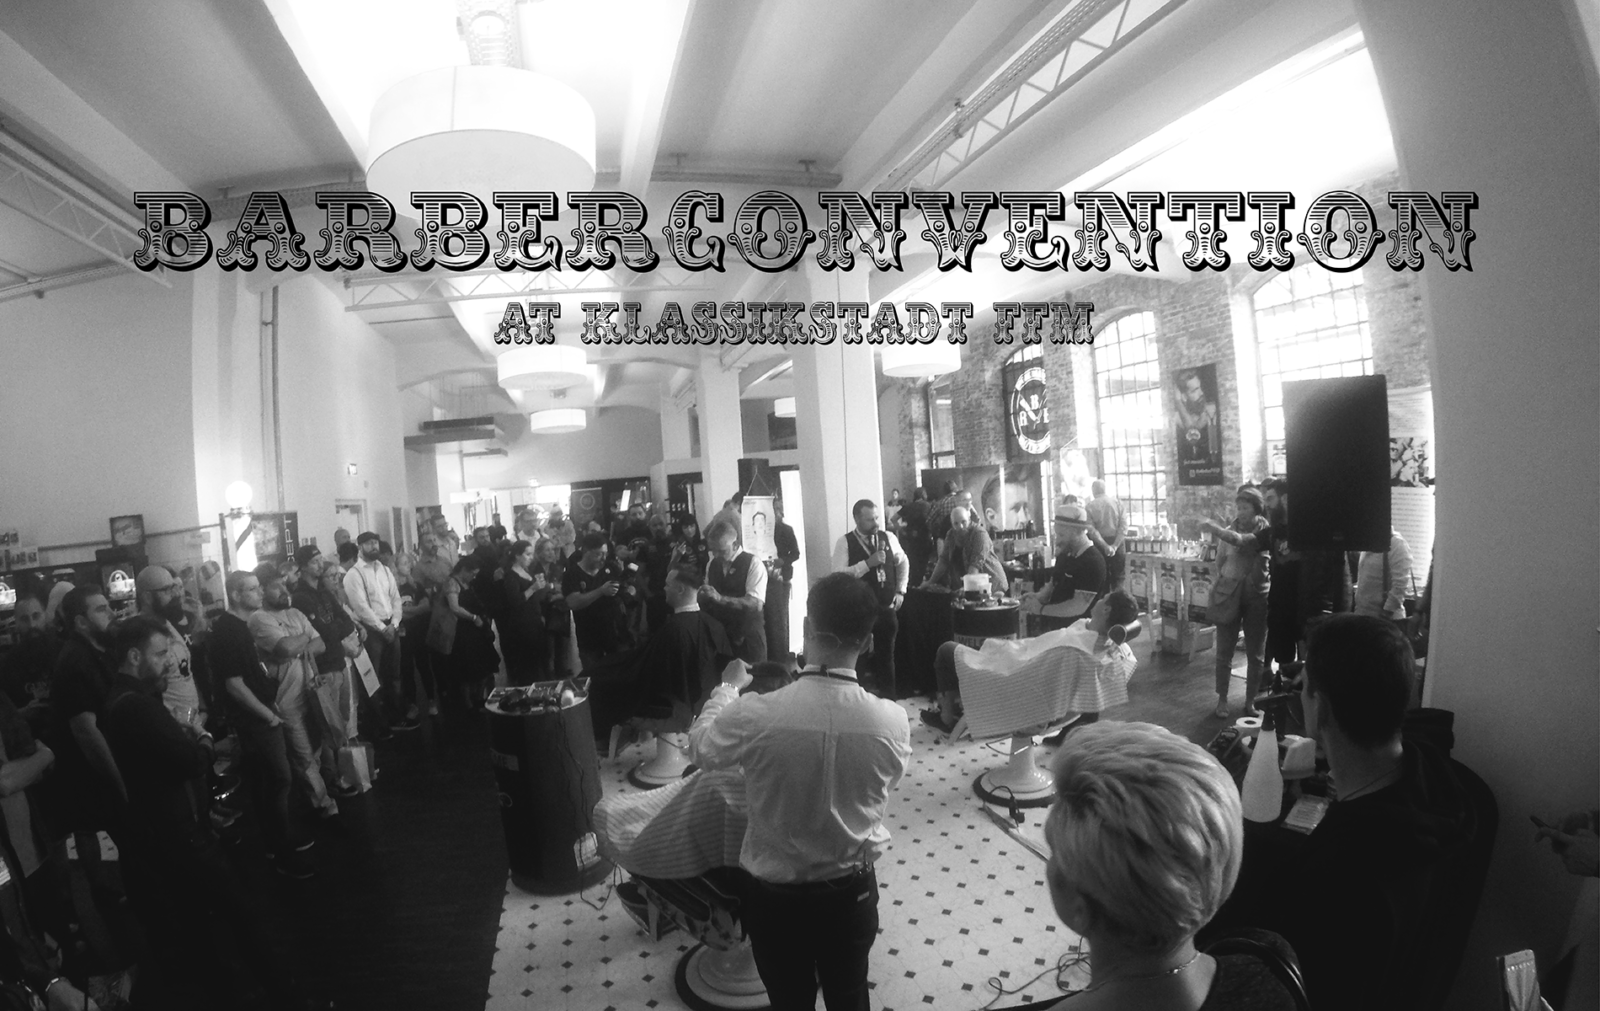 – Greetings from the Barberconvention –